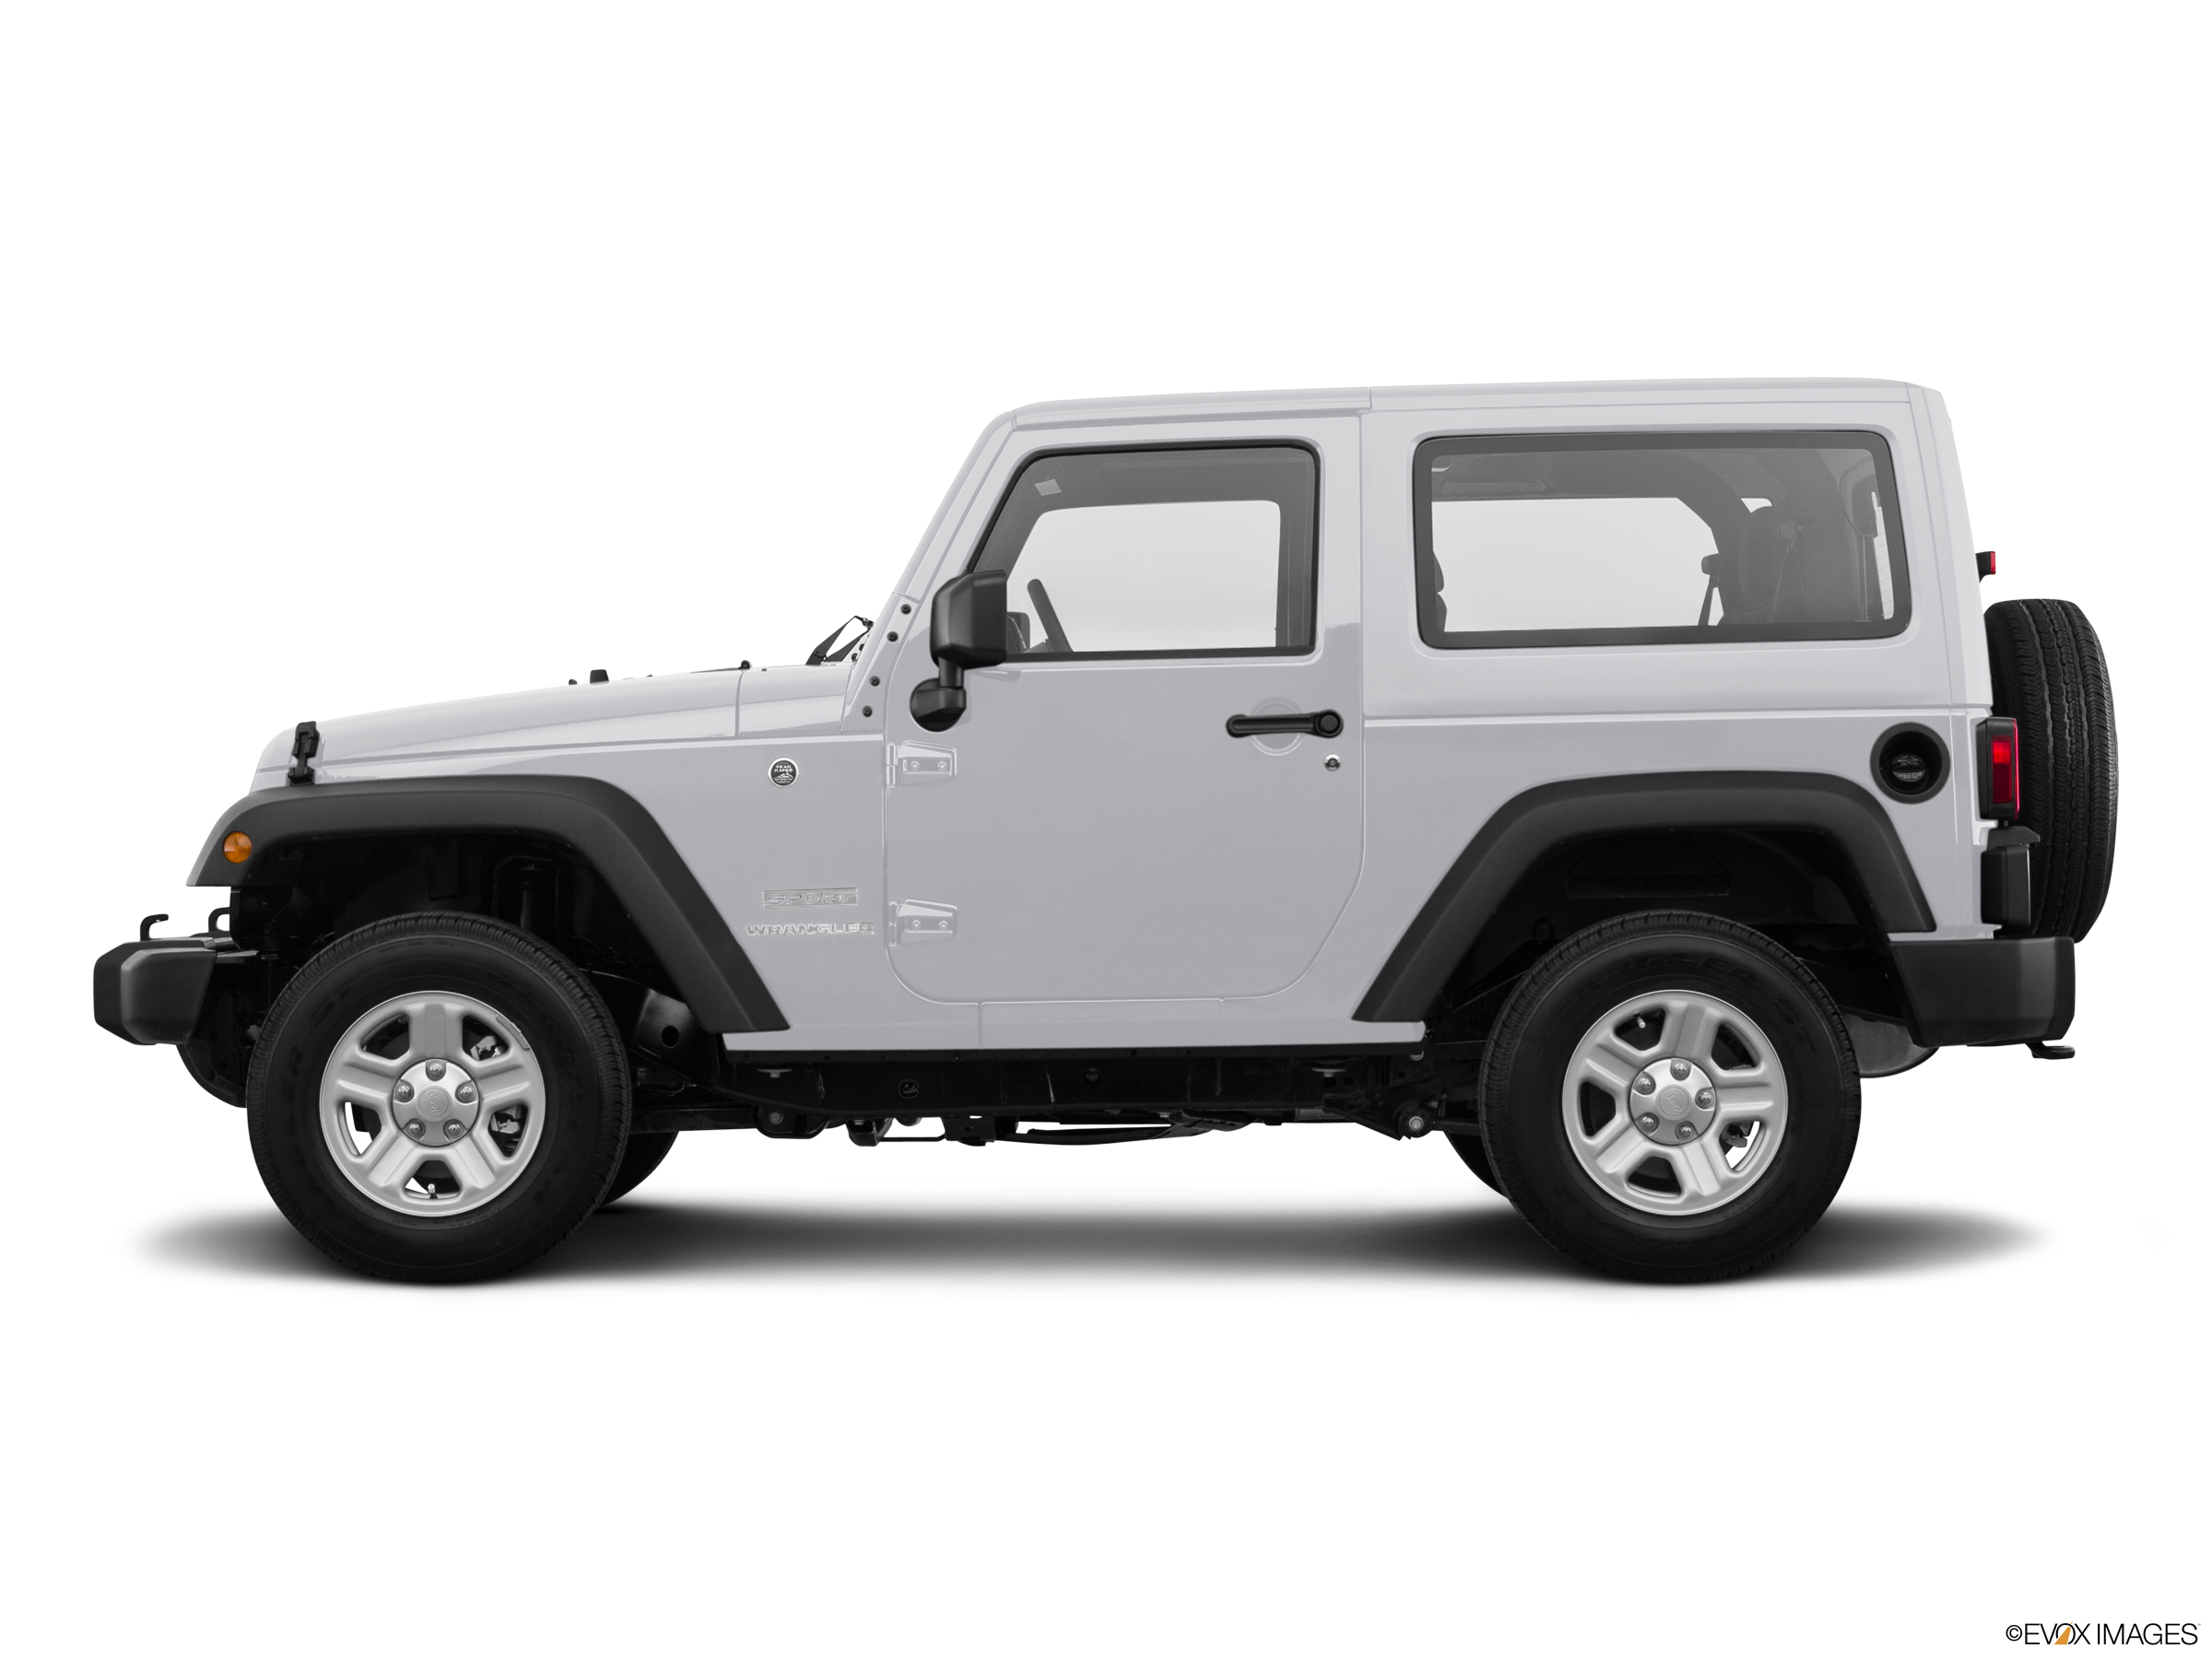 2018 Jeep Wrangler Unlimited Price, Value, Ratings & Reviews